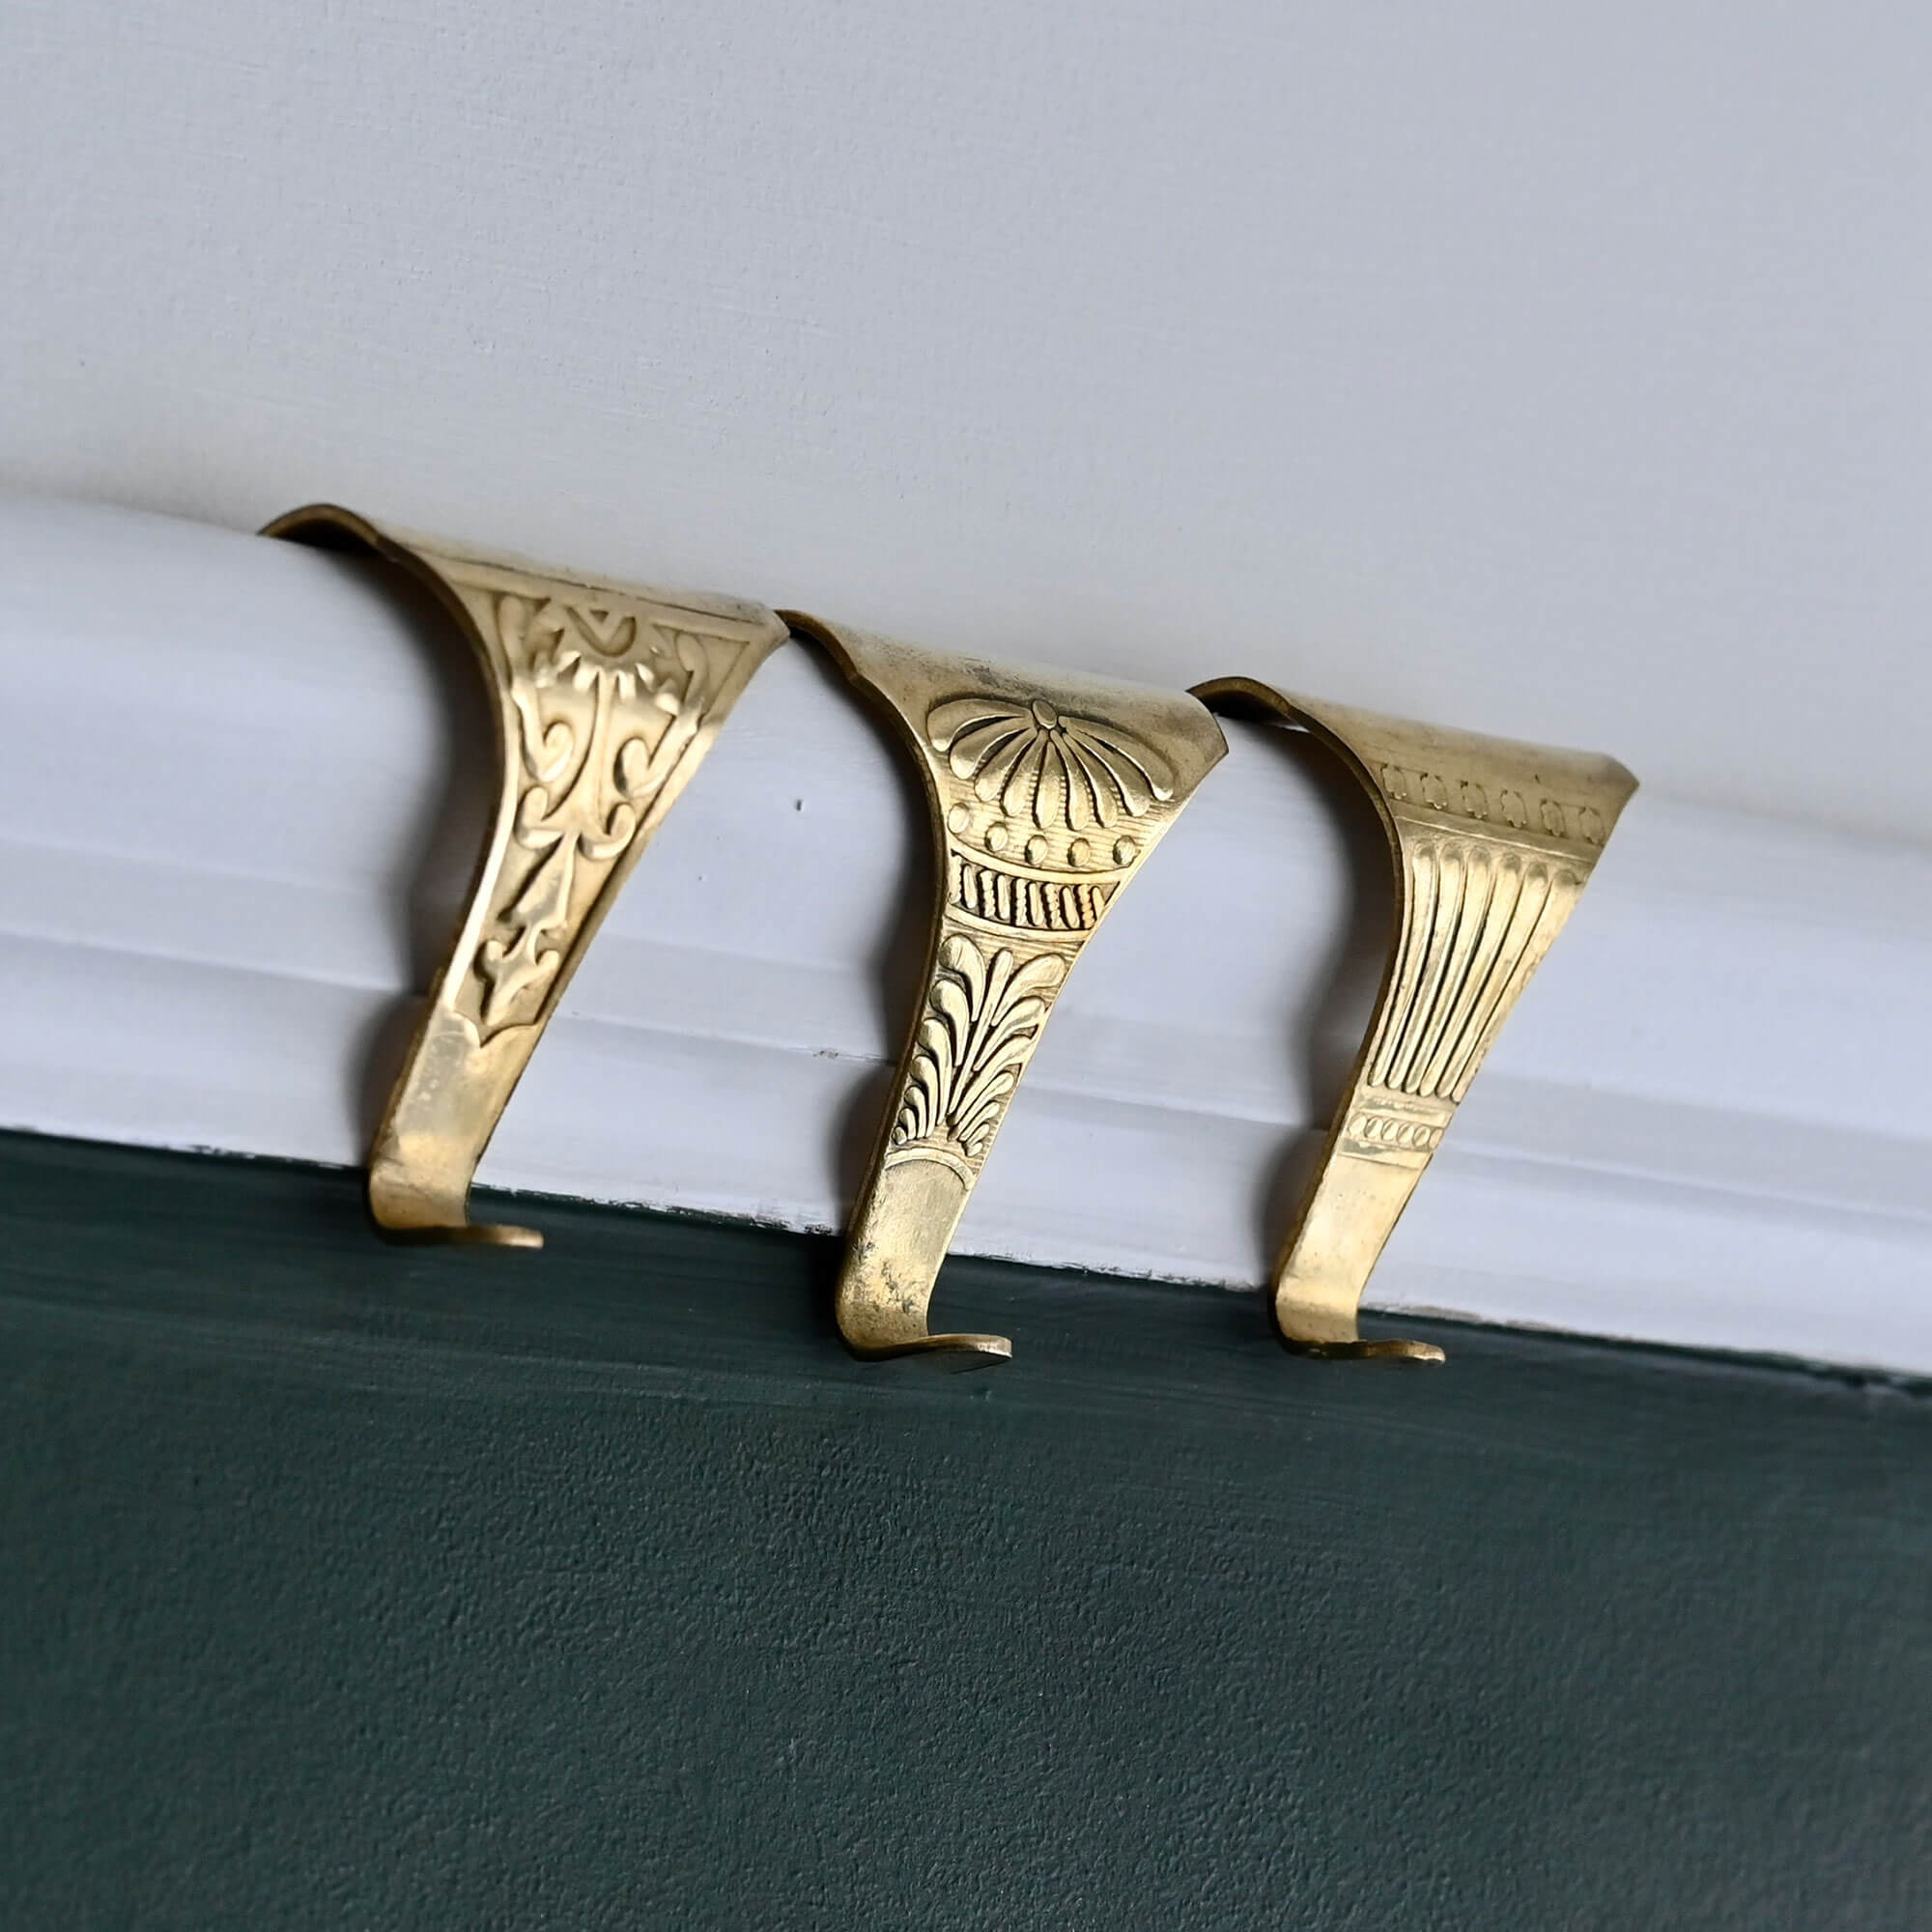 Standard No 0 Picture Hooks with Pins - Brass Plated